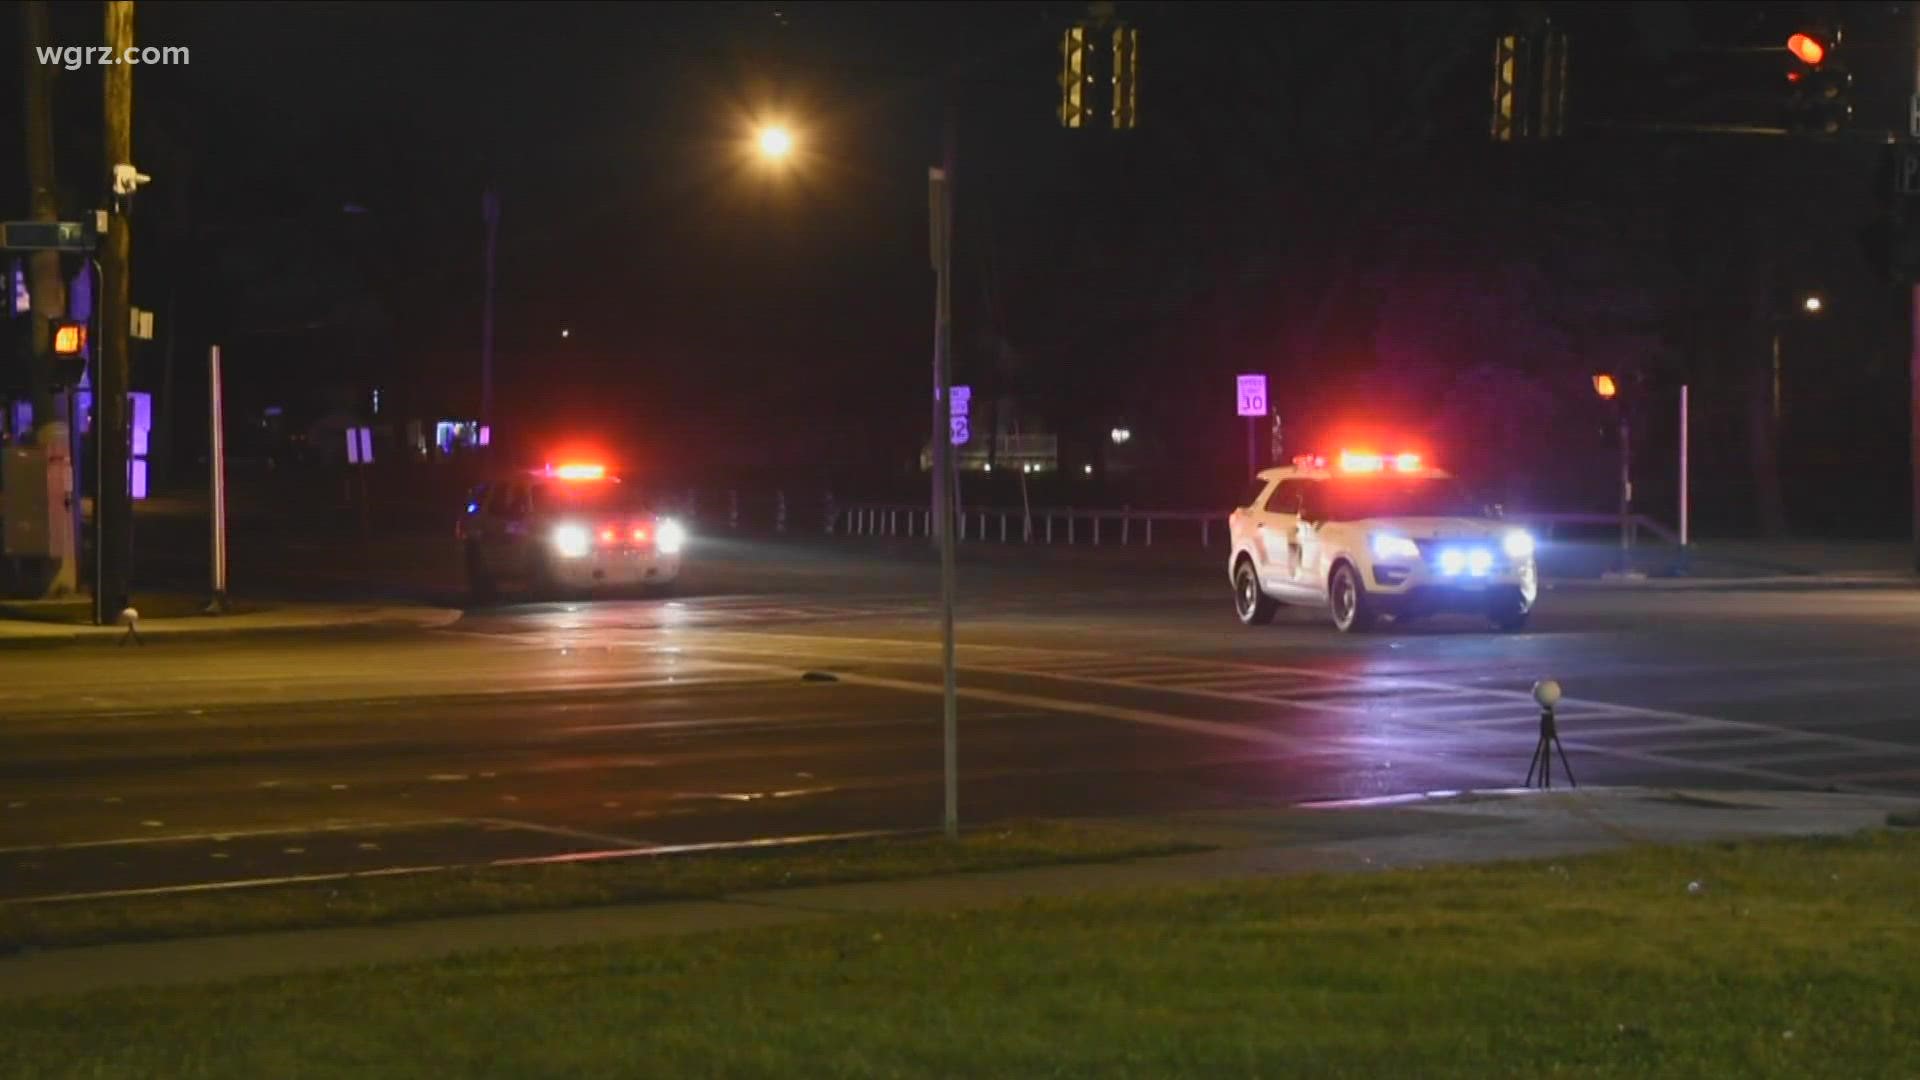 A 17 year old boy is recovering after being hit by a car in Niagara Falls just before 11 Friday night.